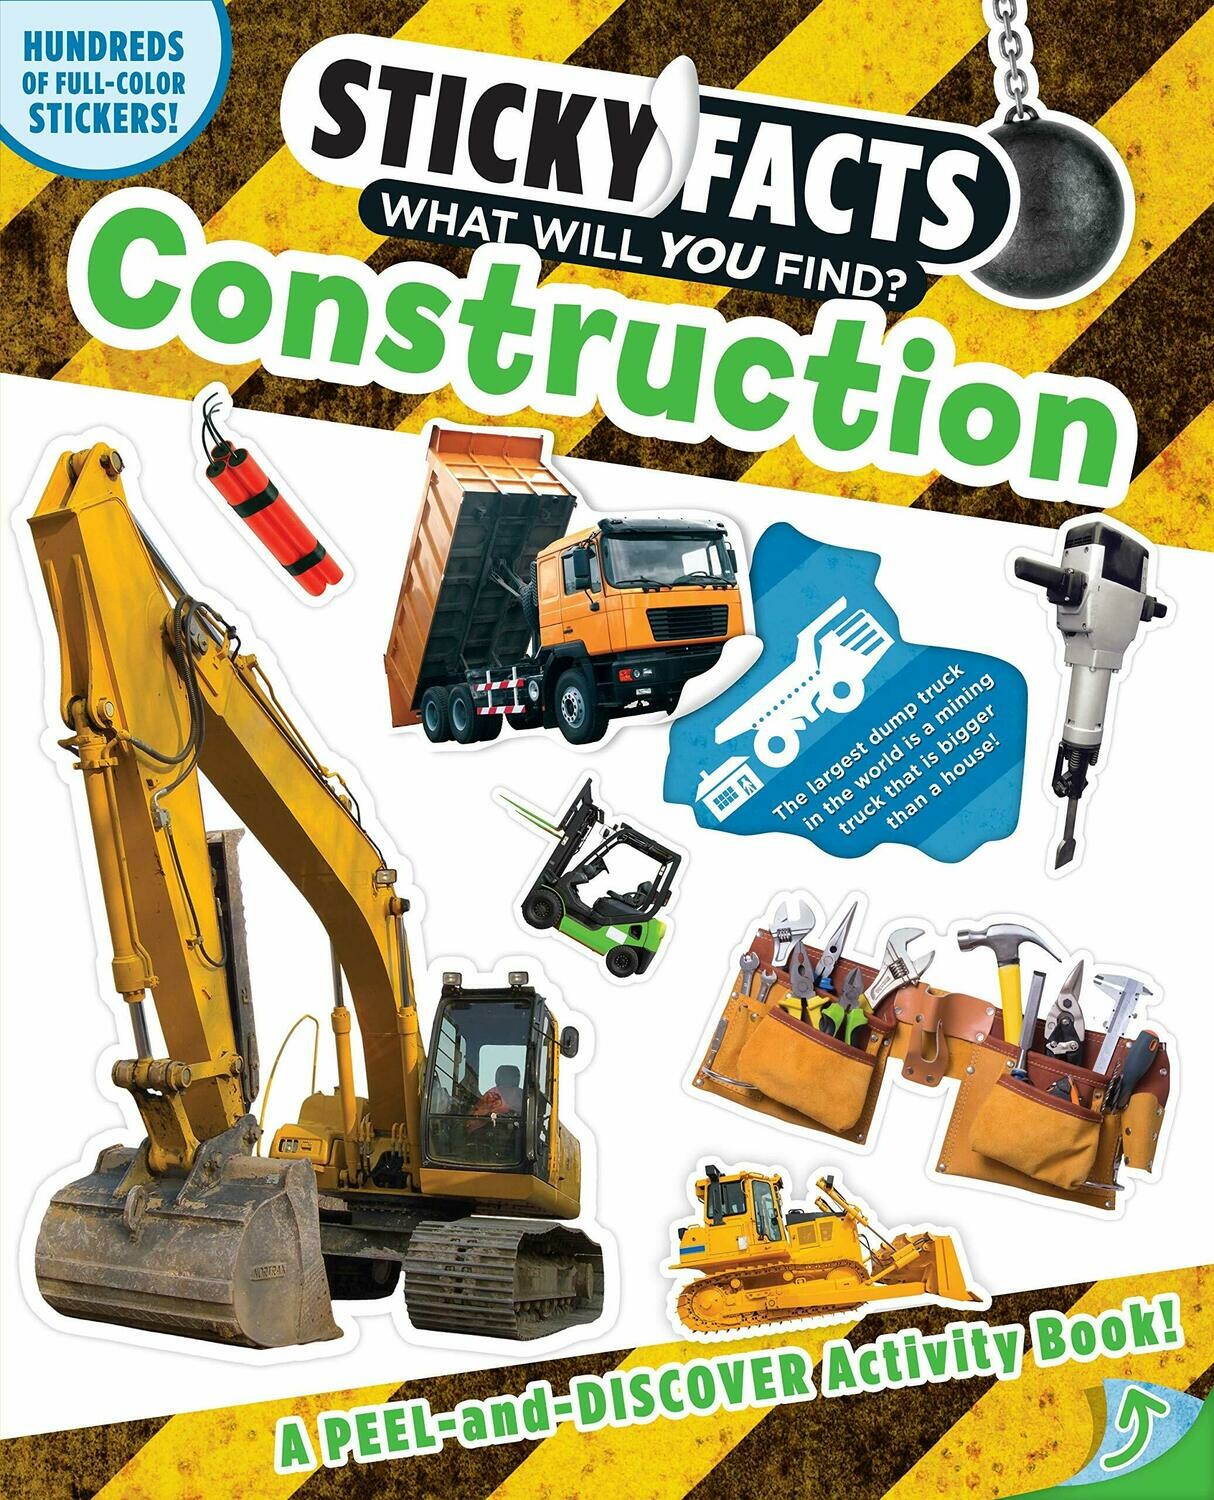 "Sticky Facts: What Will You Find? - Construction"